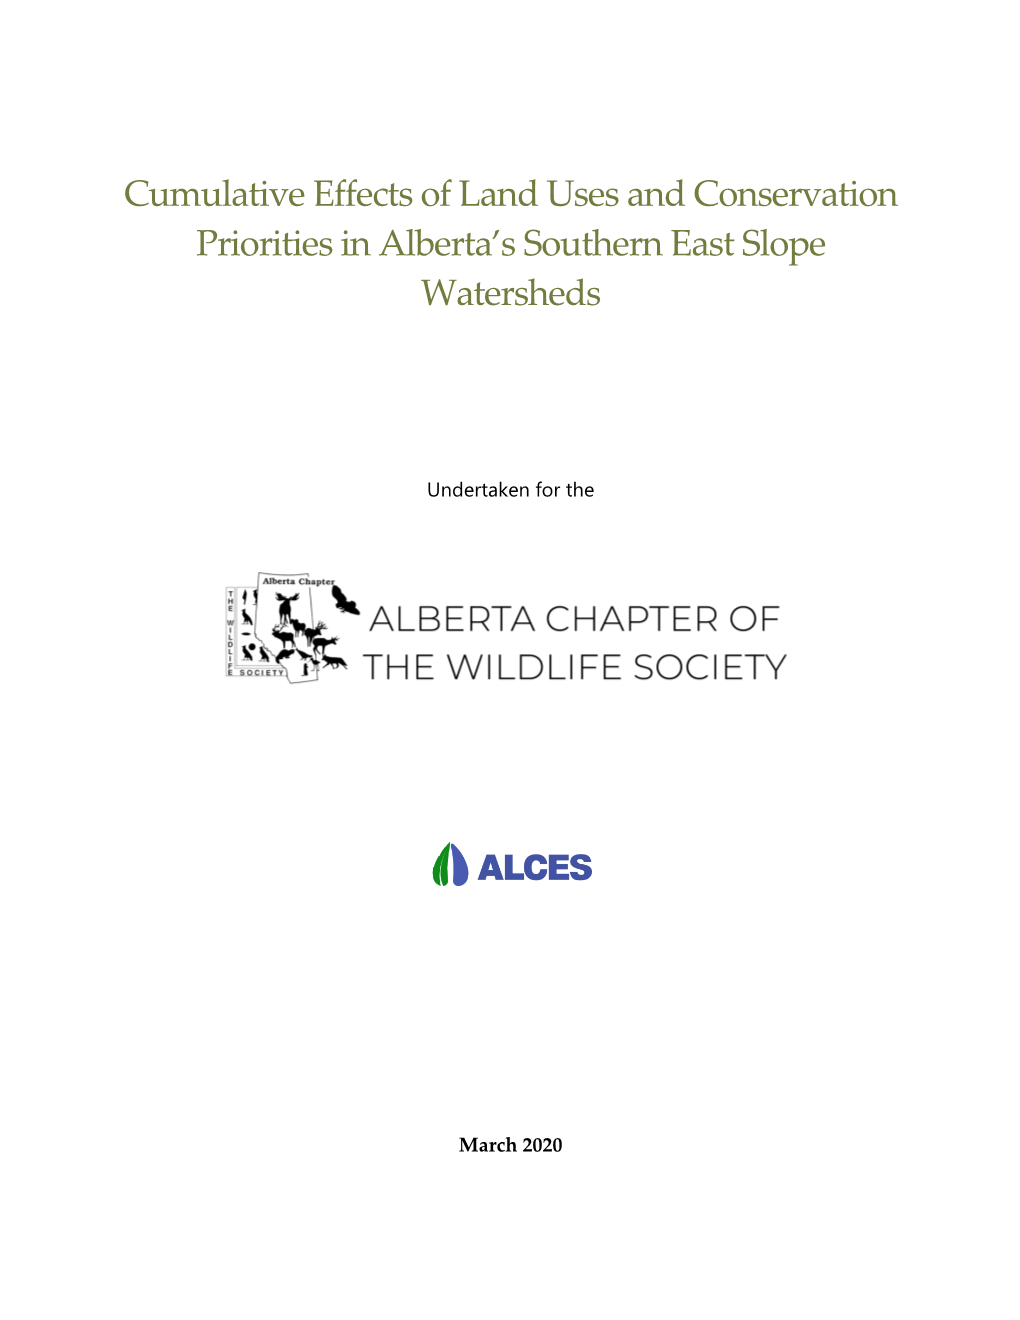 Cumulative Effects of Land Uses and Conservation Priorities in Alberta's